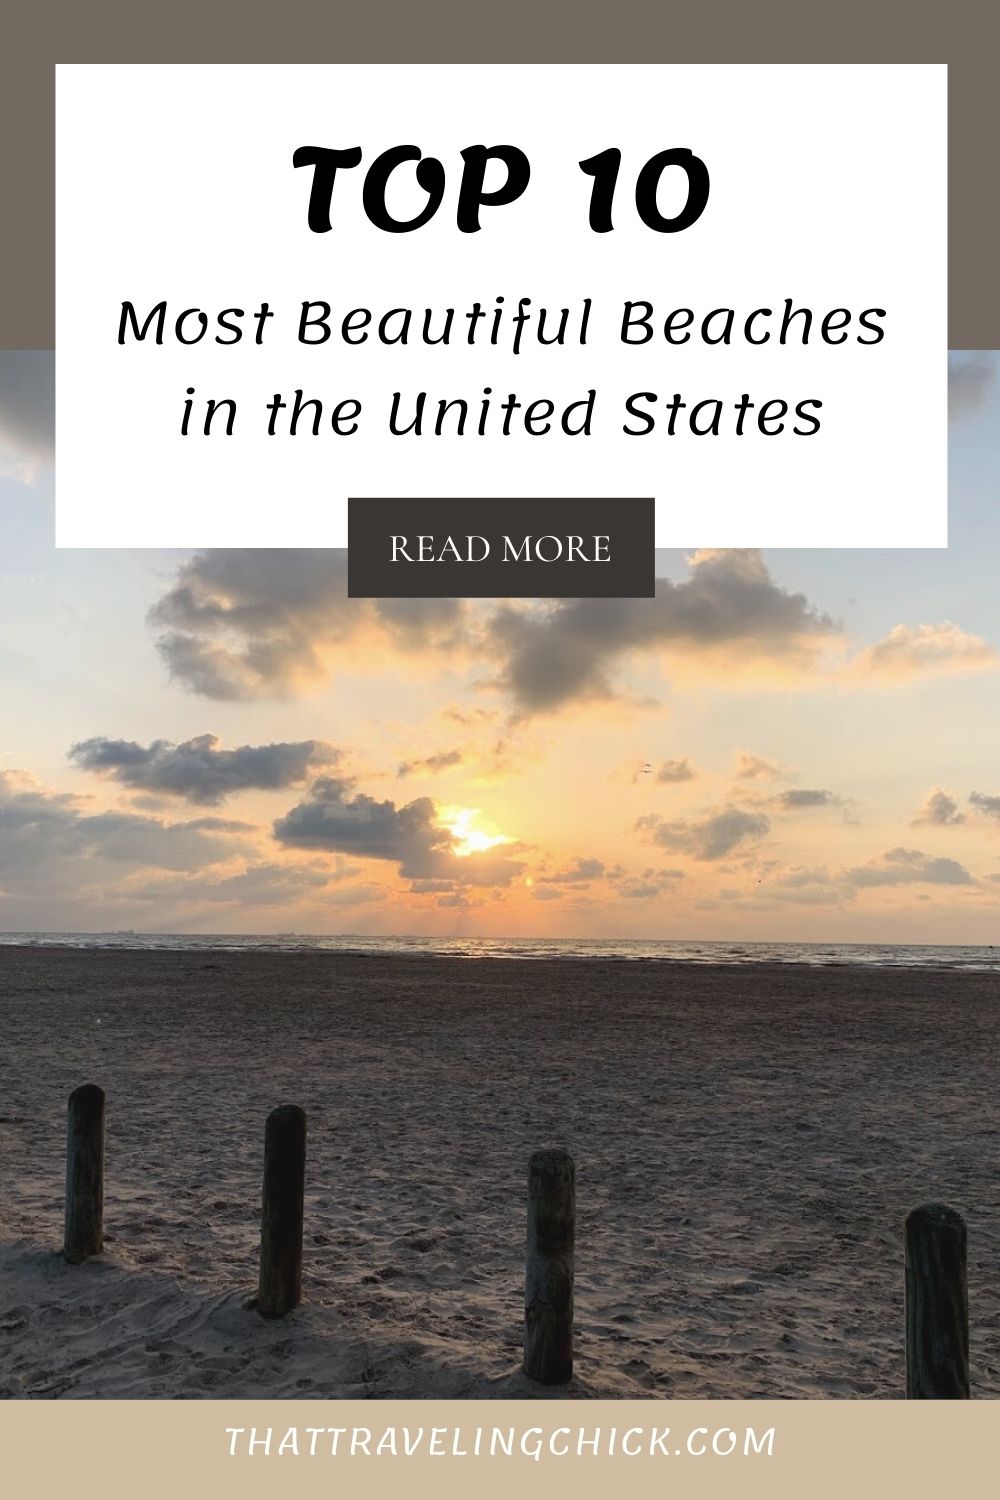 Top 10 Most Beautiful Beaches in the United States #beautifulbeaches #beautifulbeachesintheunitedstates